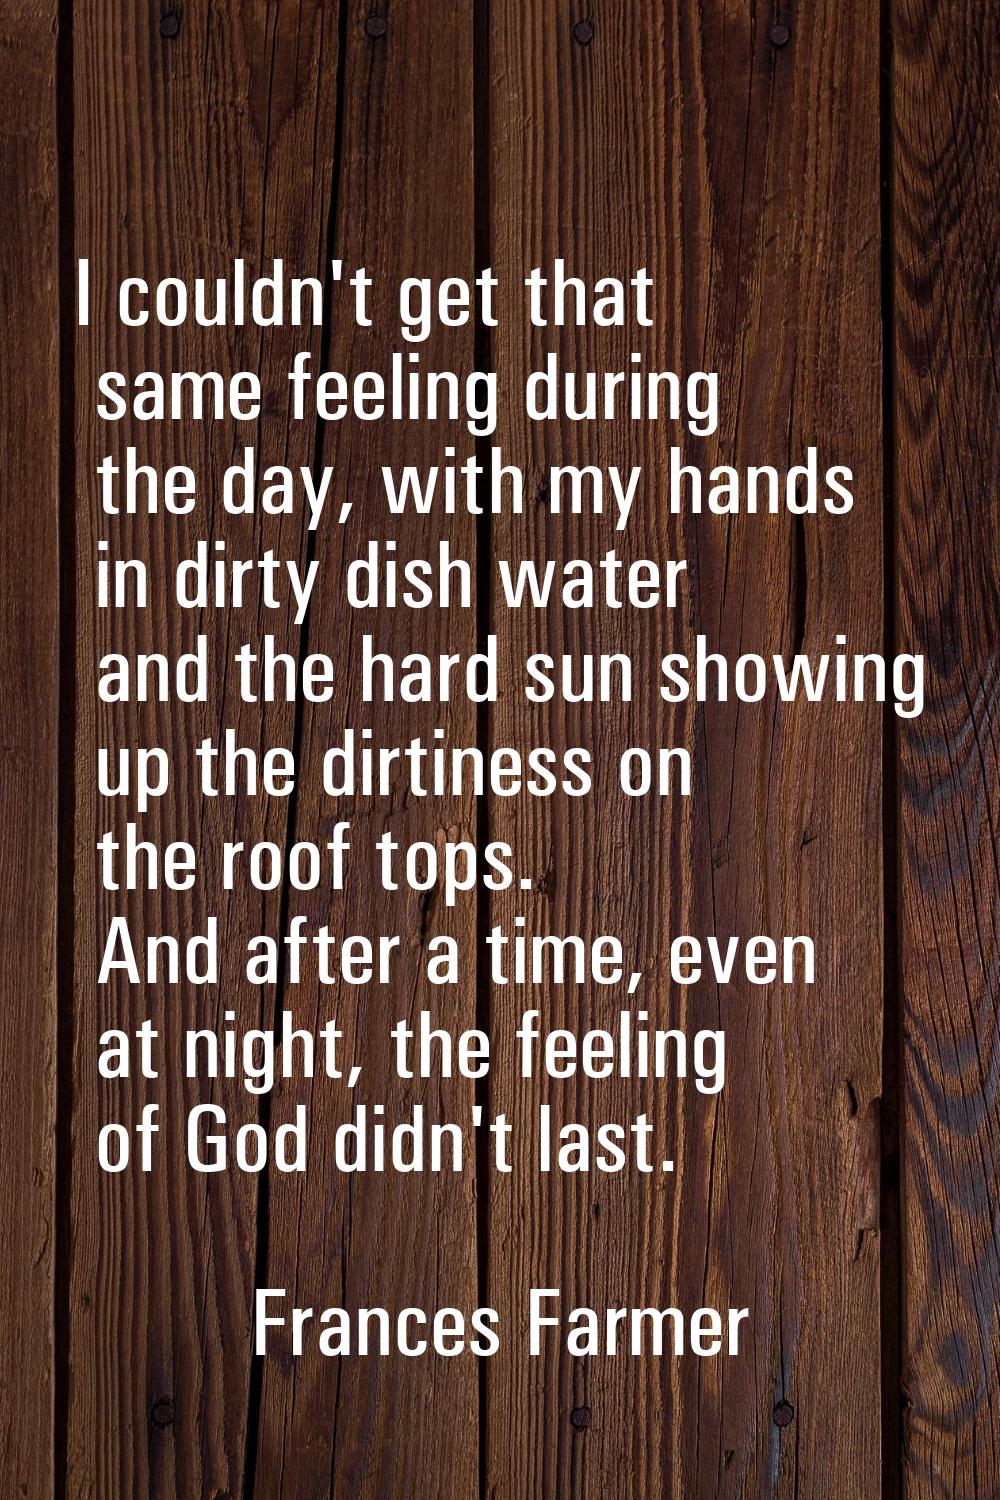 I couldn't get that same feeling during the day, with my hands in dirty dish water and the hard sun